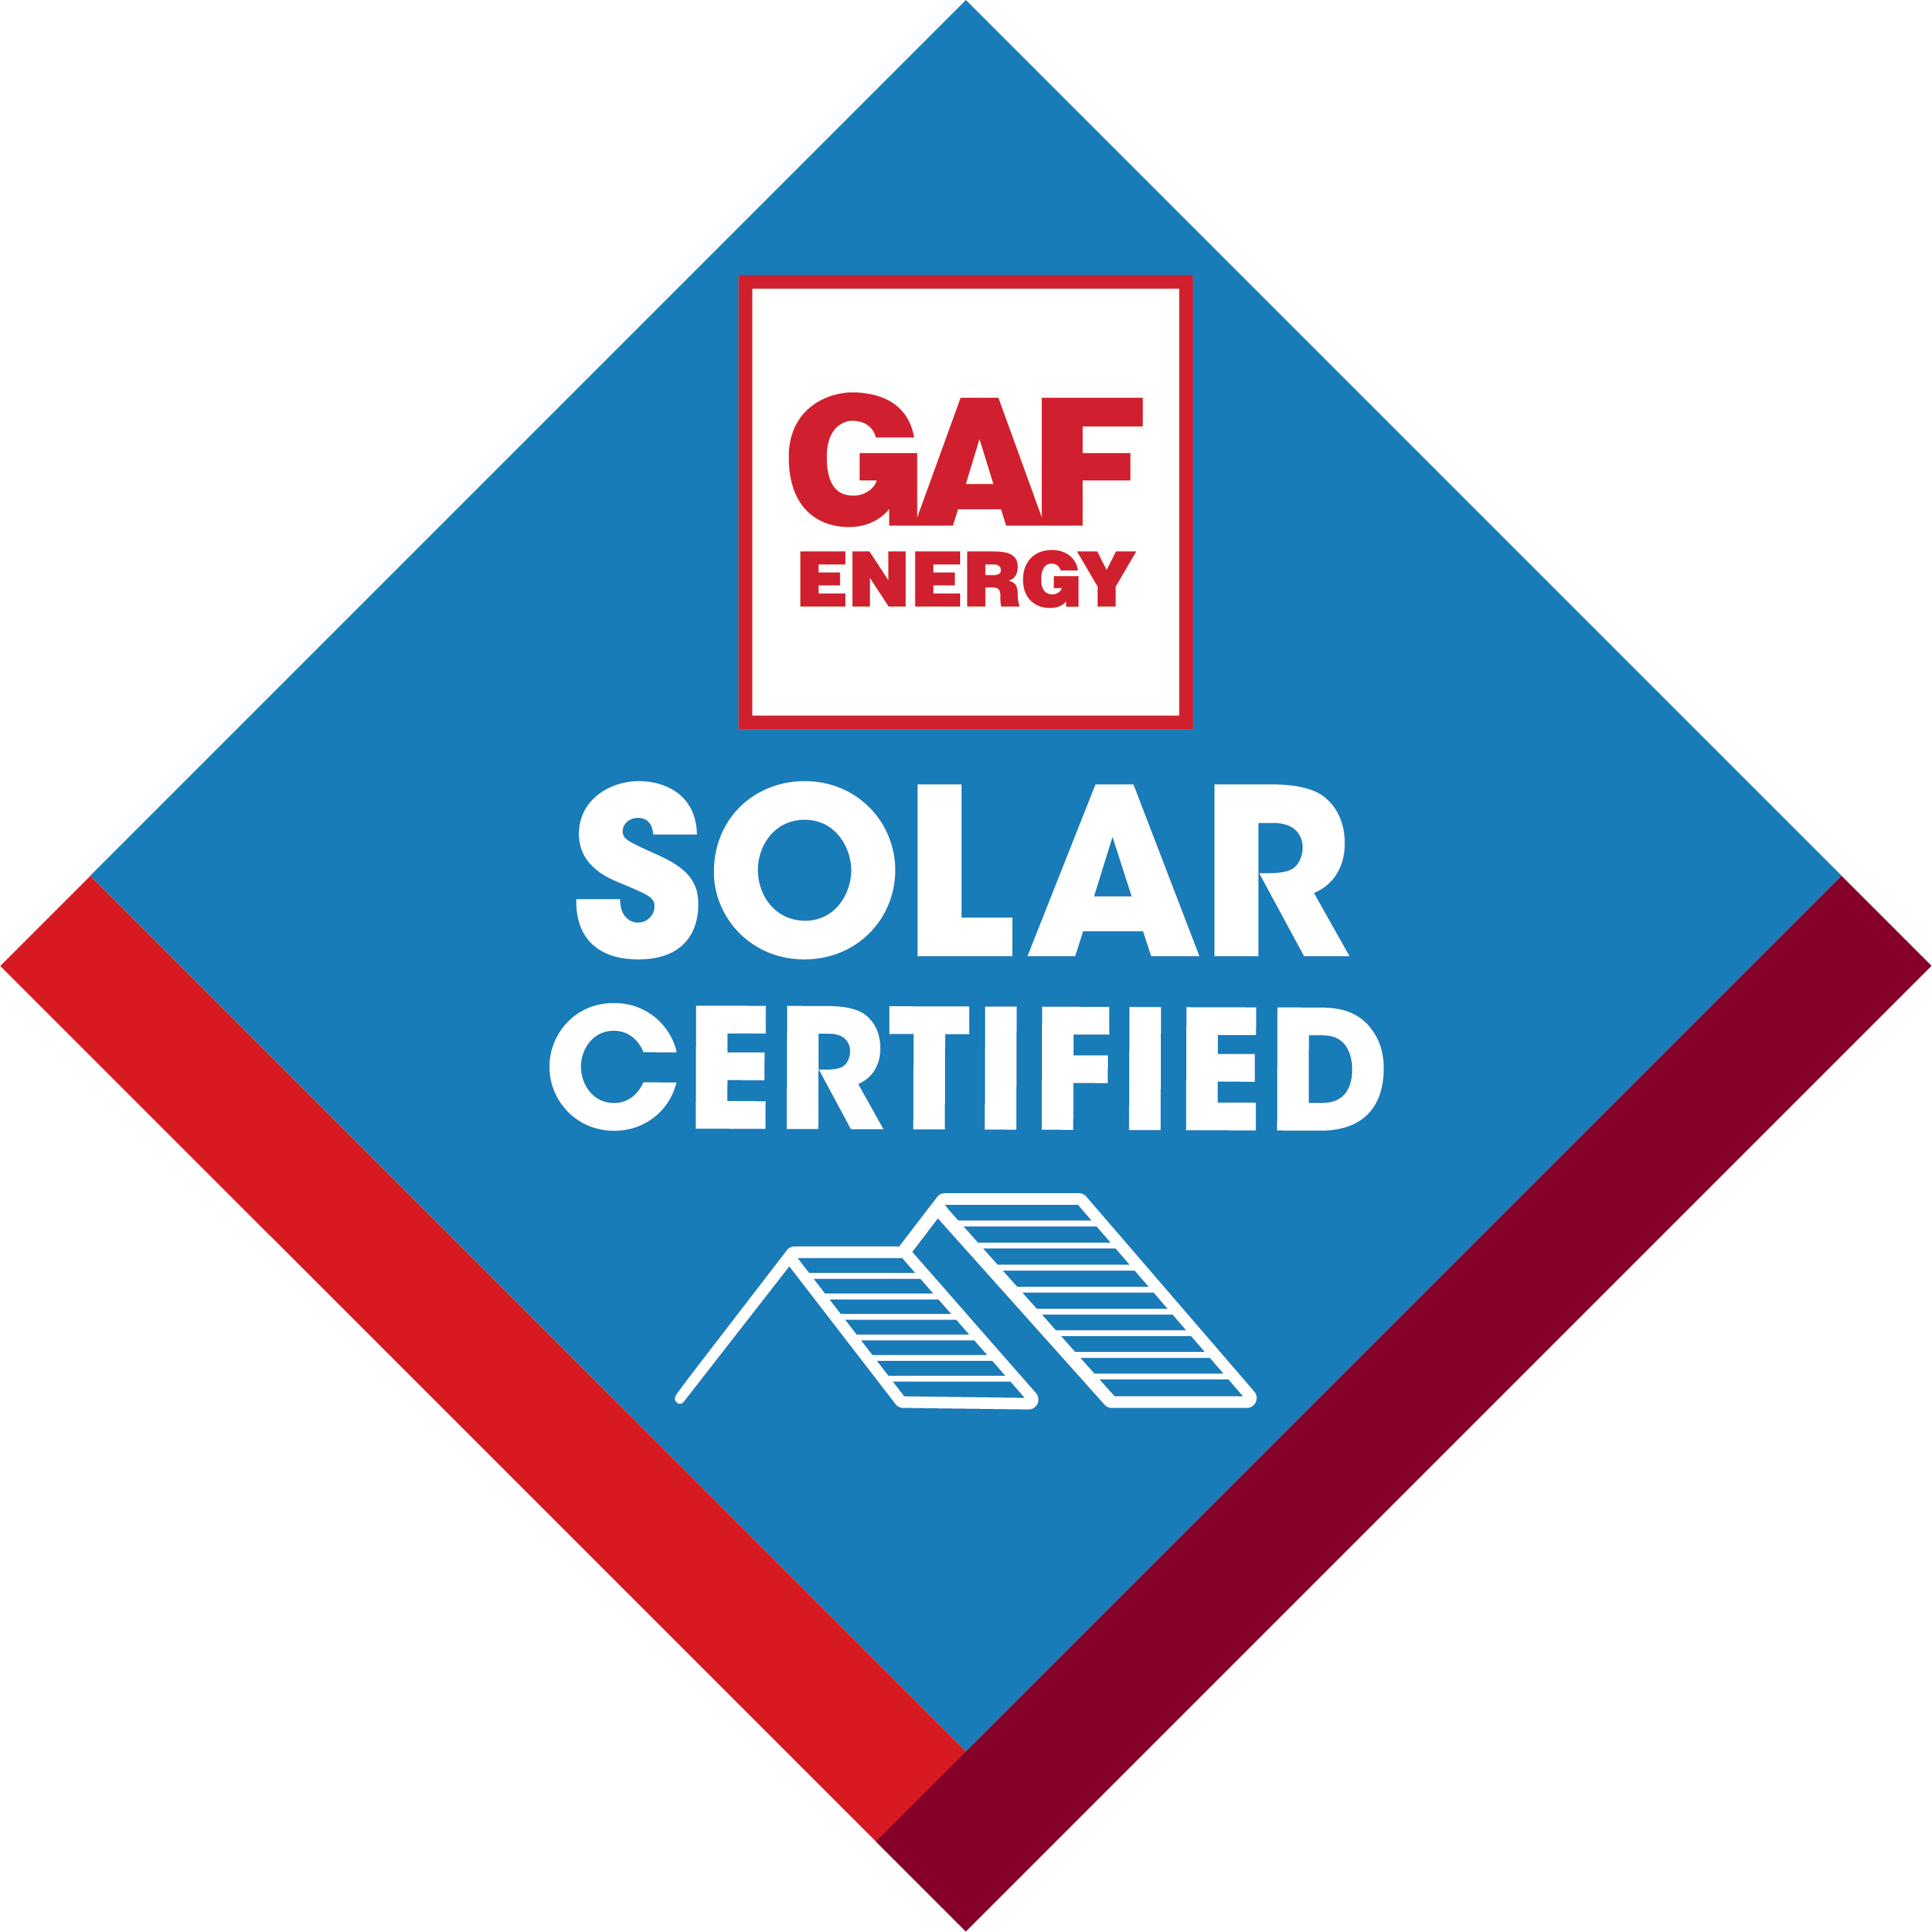 GAF Energy Solar Certified Installer Badge for G. Fedale Roofing and Siding